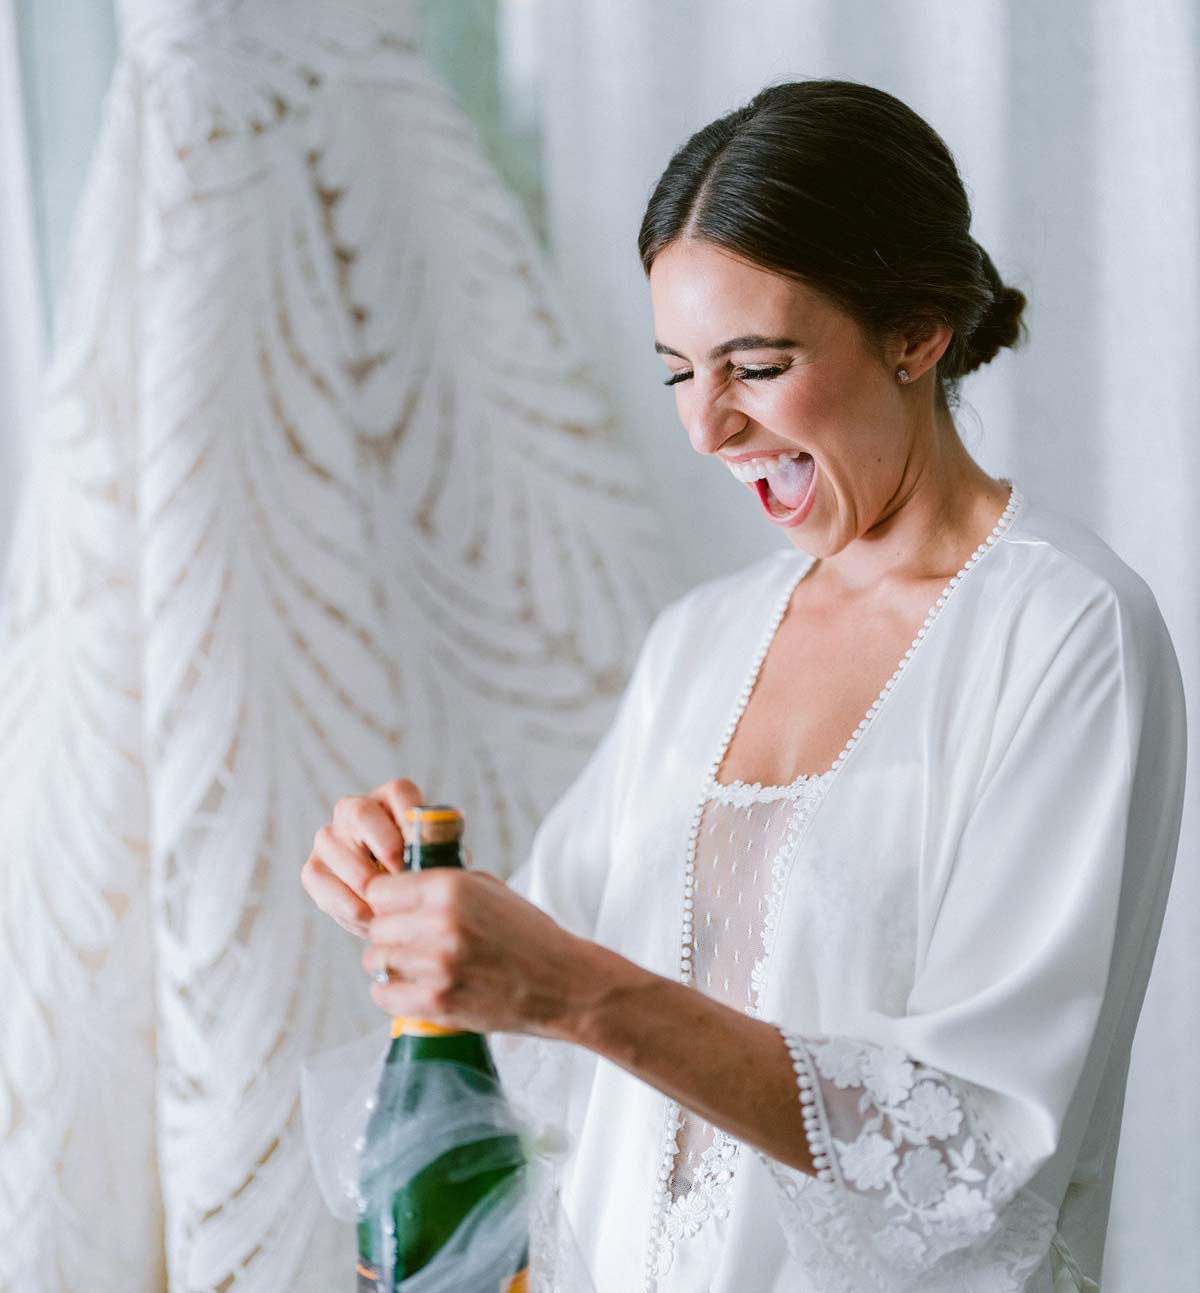 A bridal guide- 5 must have splurges to add to your wedding day